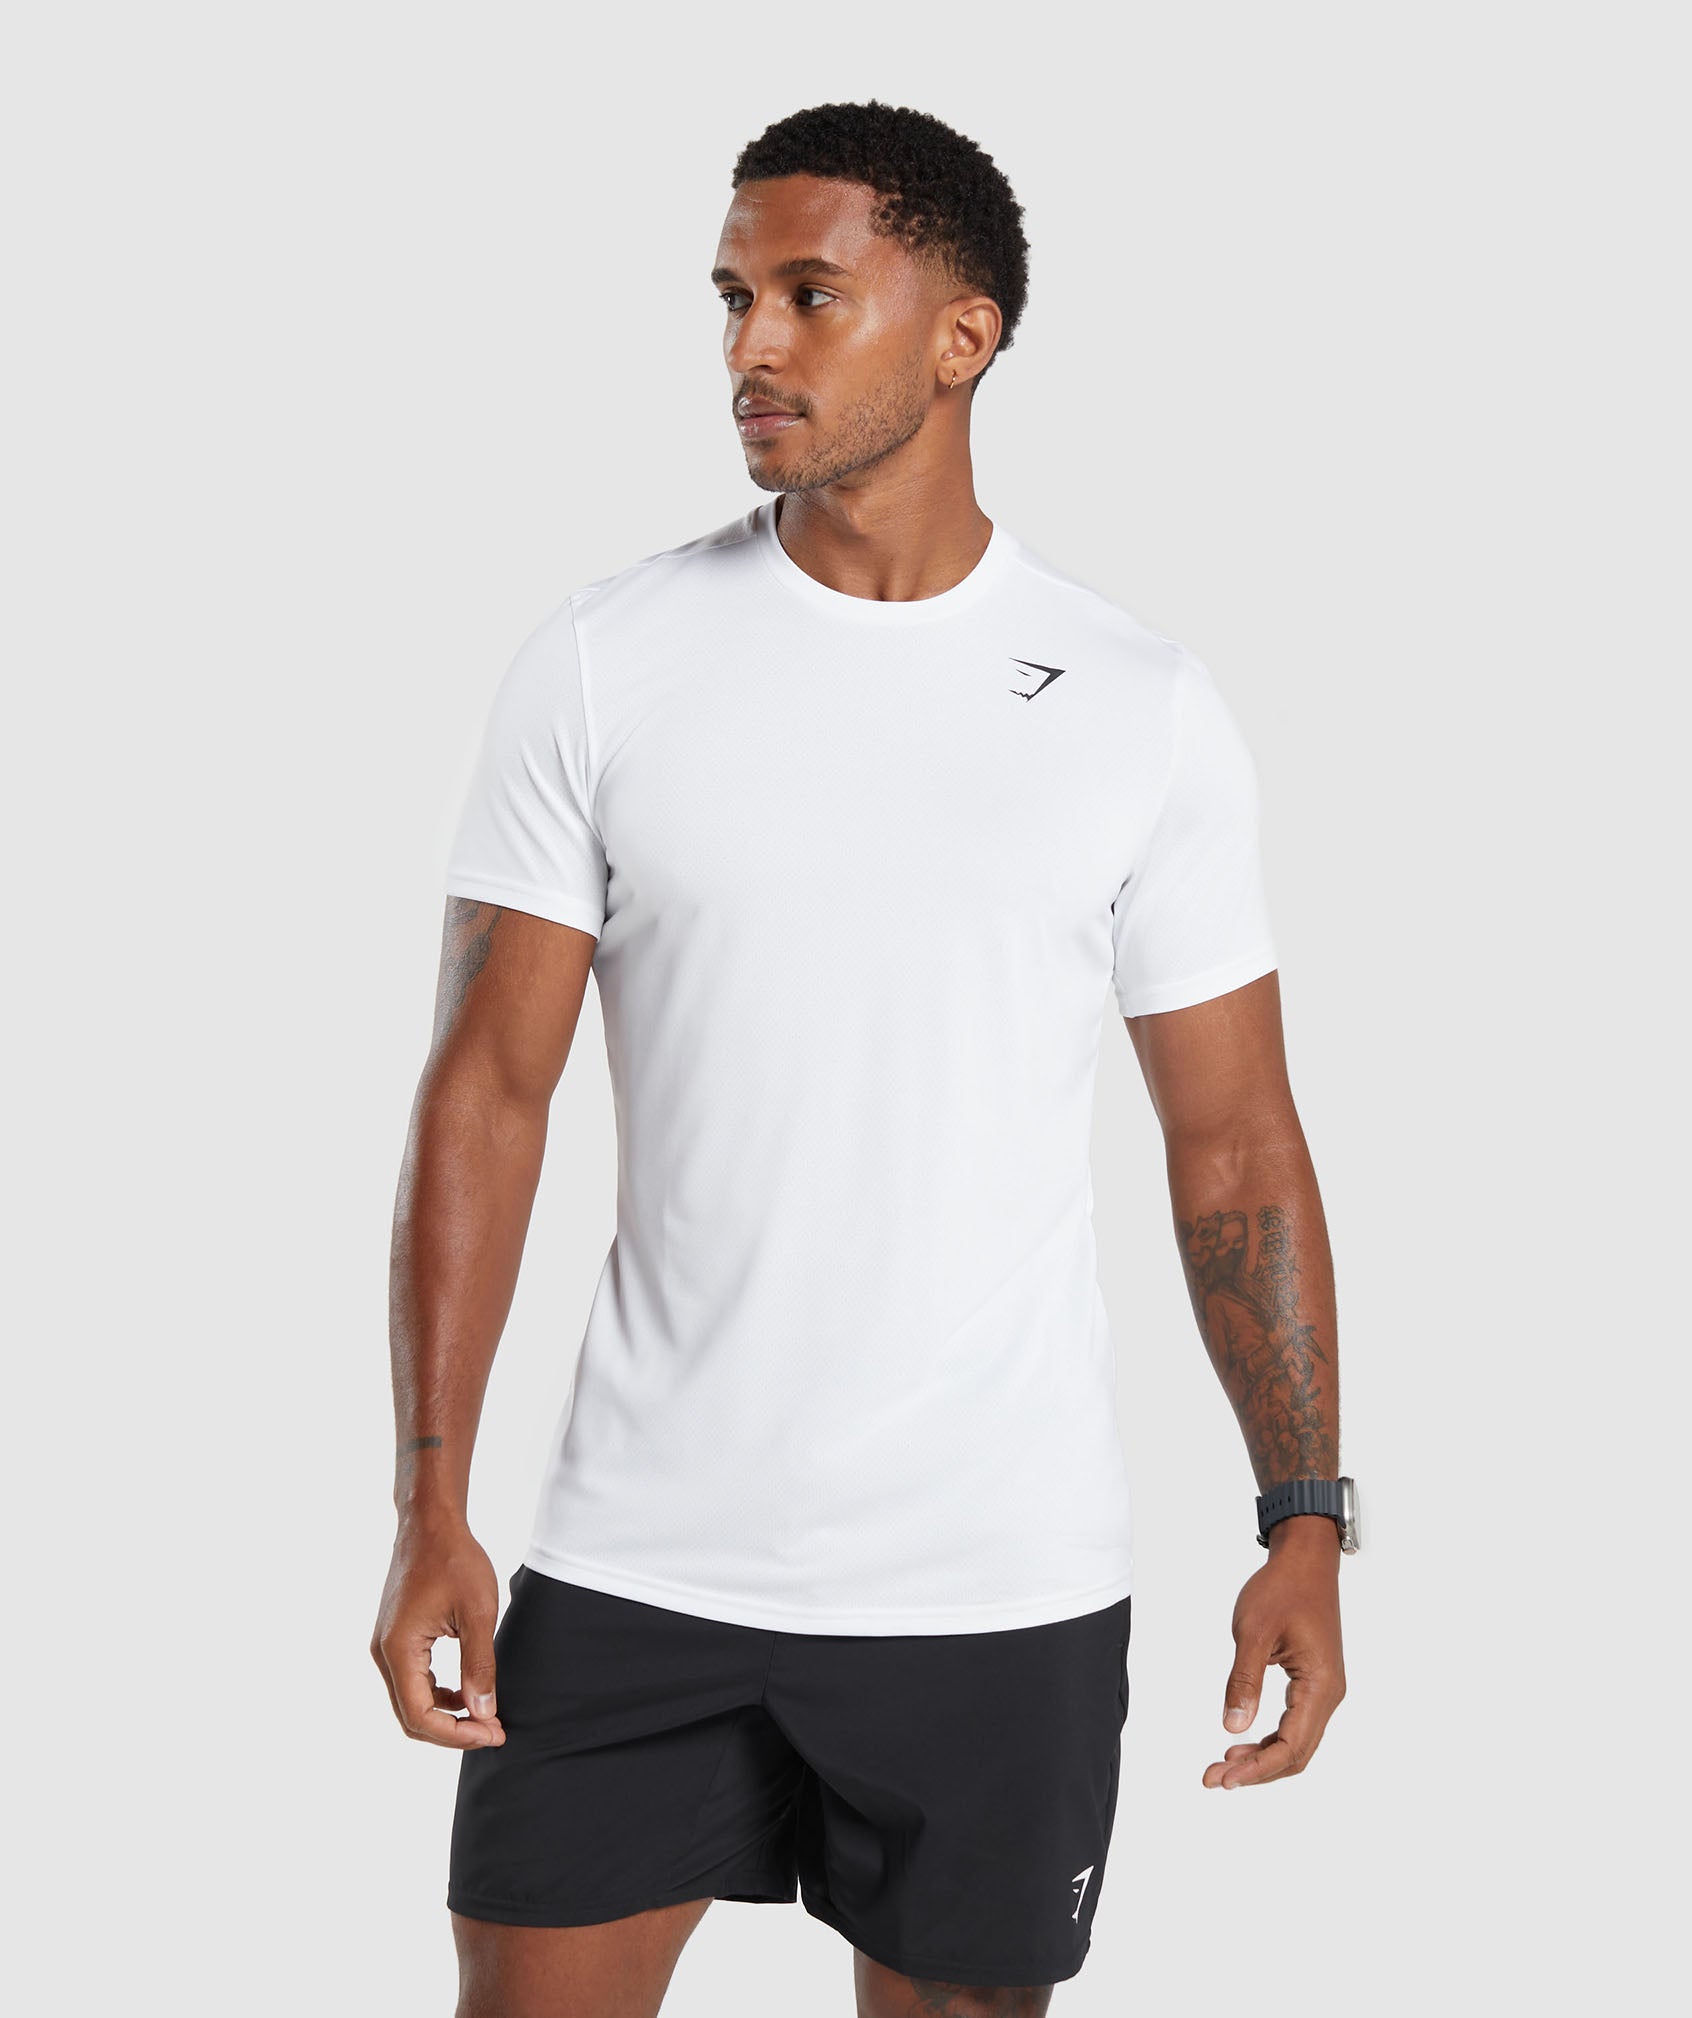 Arrival T-Shirt in White